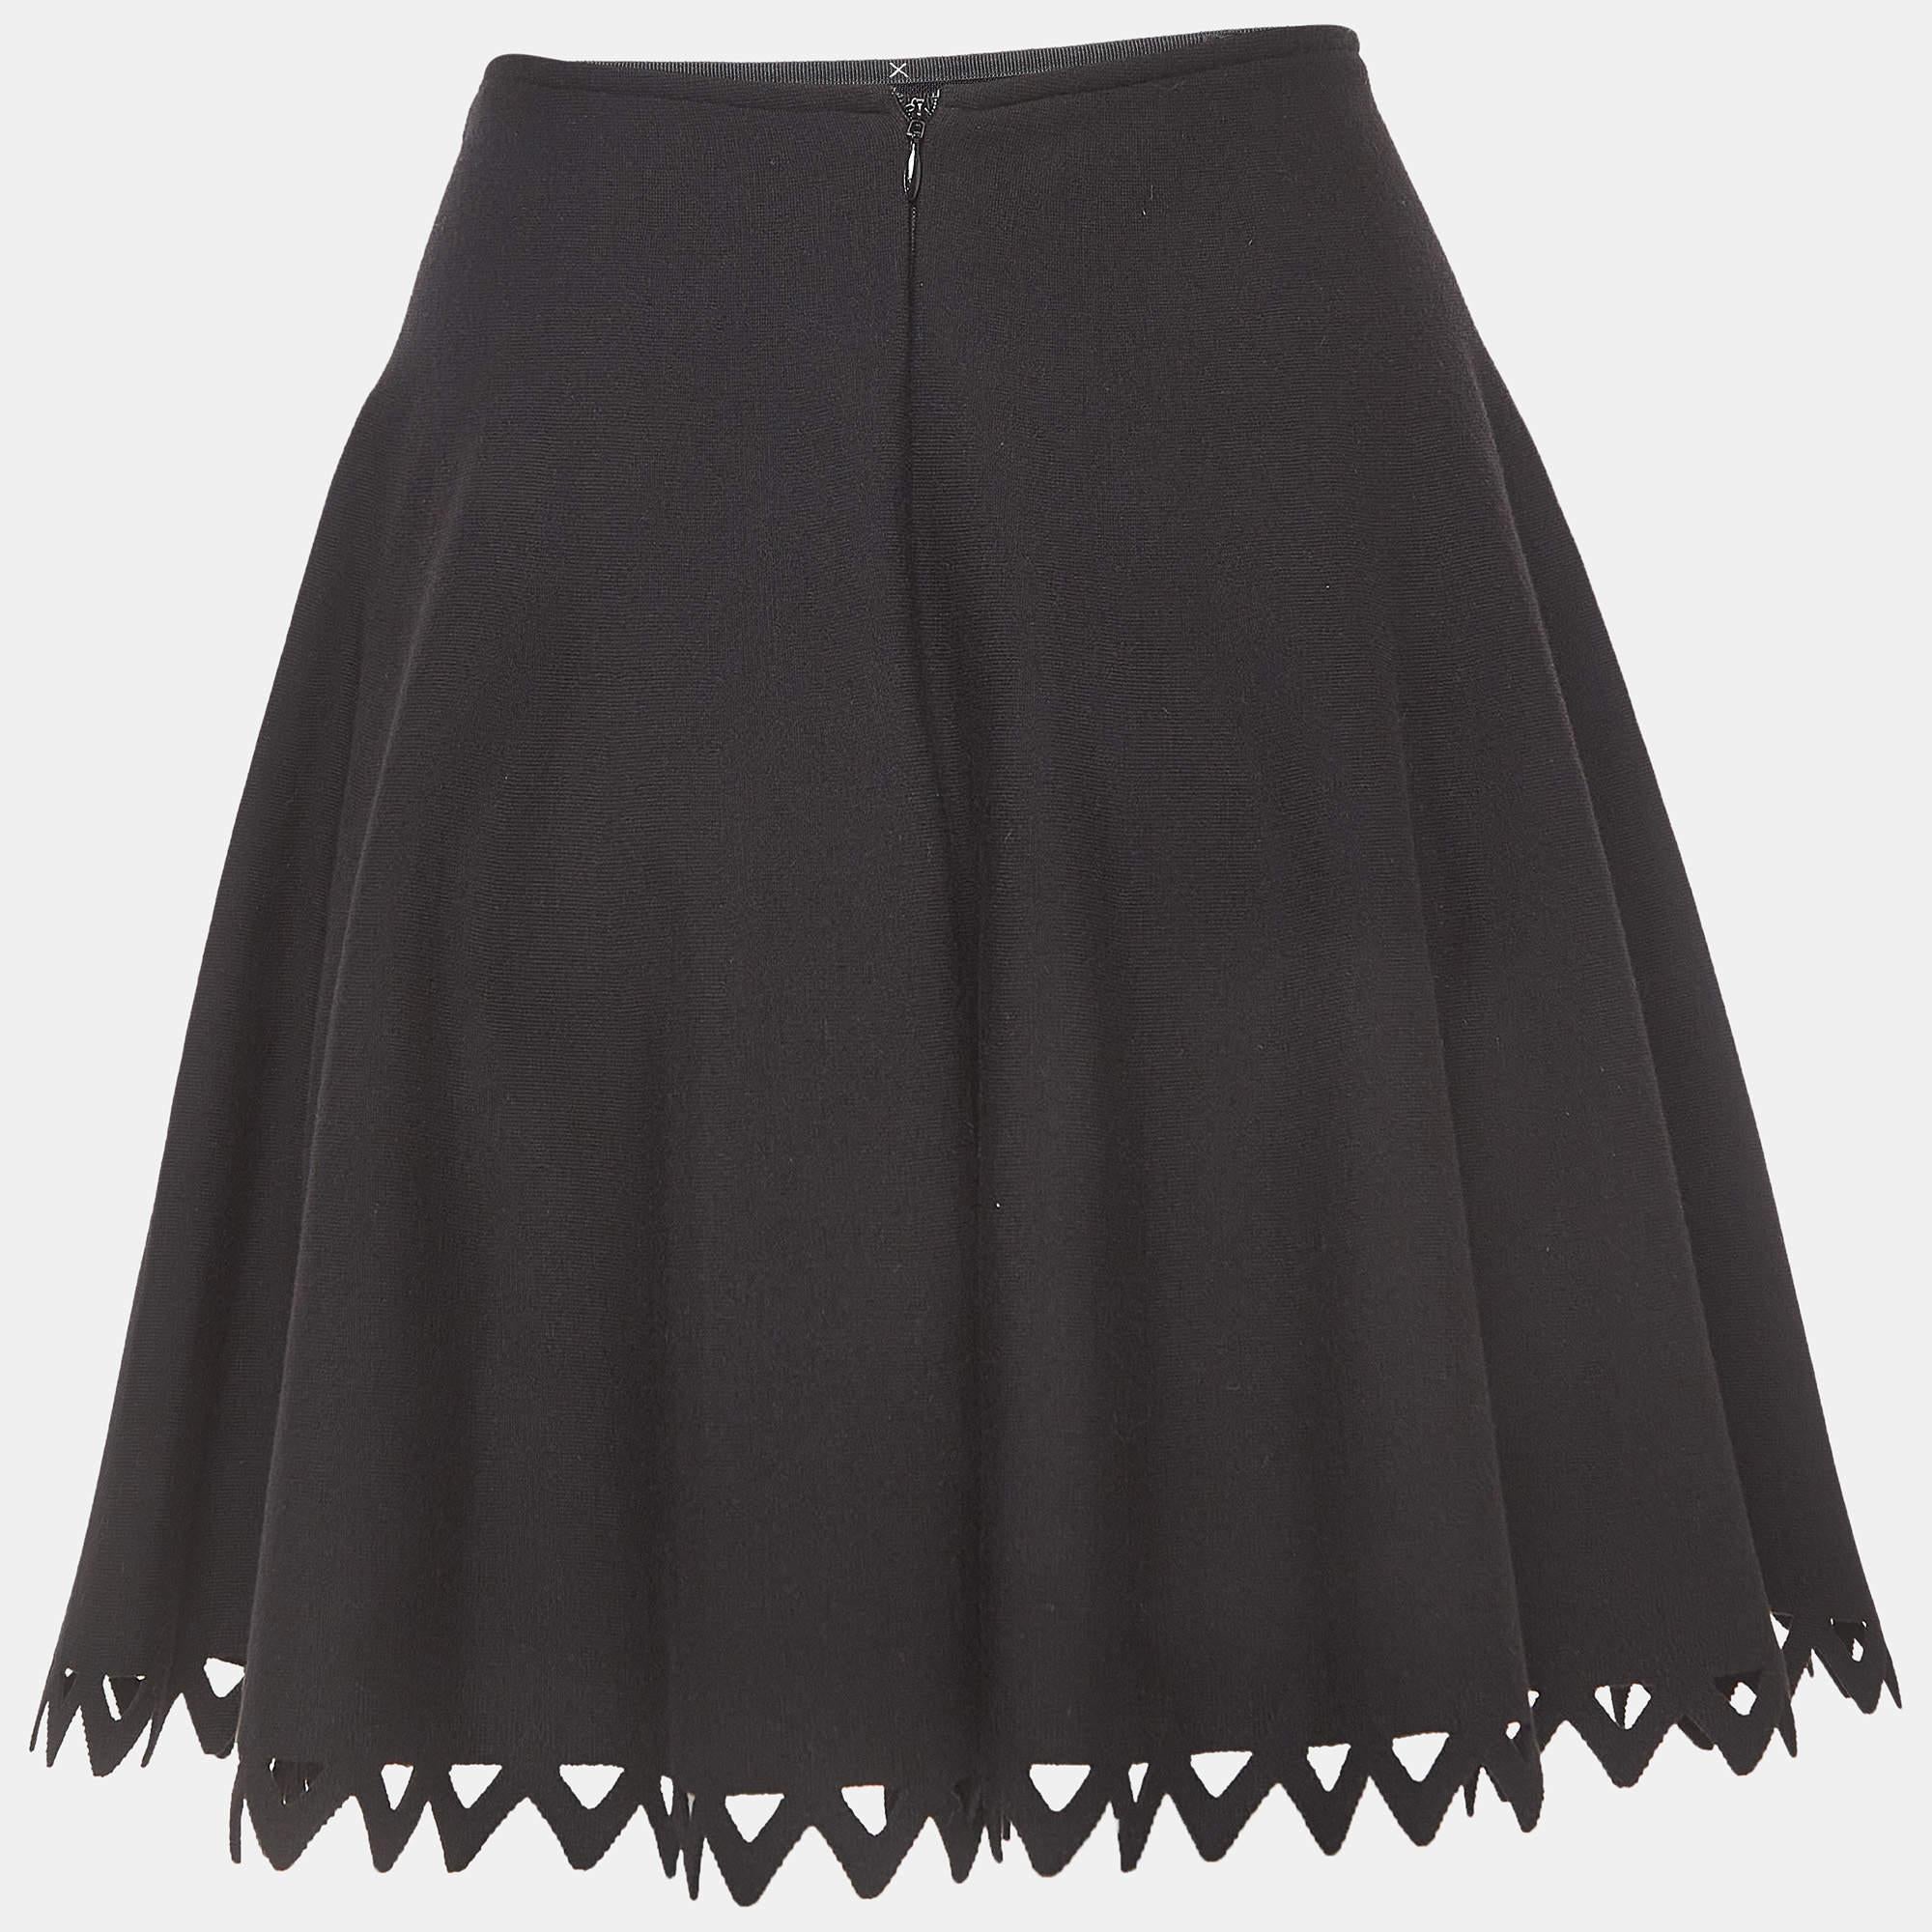 This elegant Alaia skirt is worth adding to your closet! Crafted from fine materials, it is exquisitely designed into a flattering shape.

